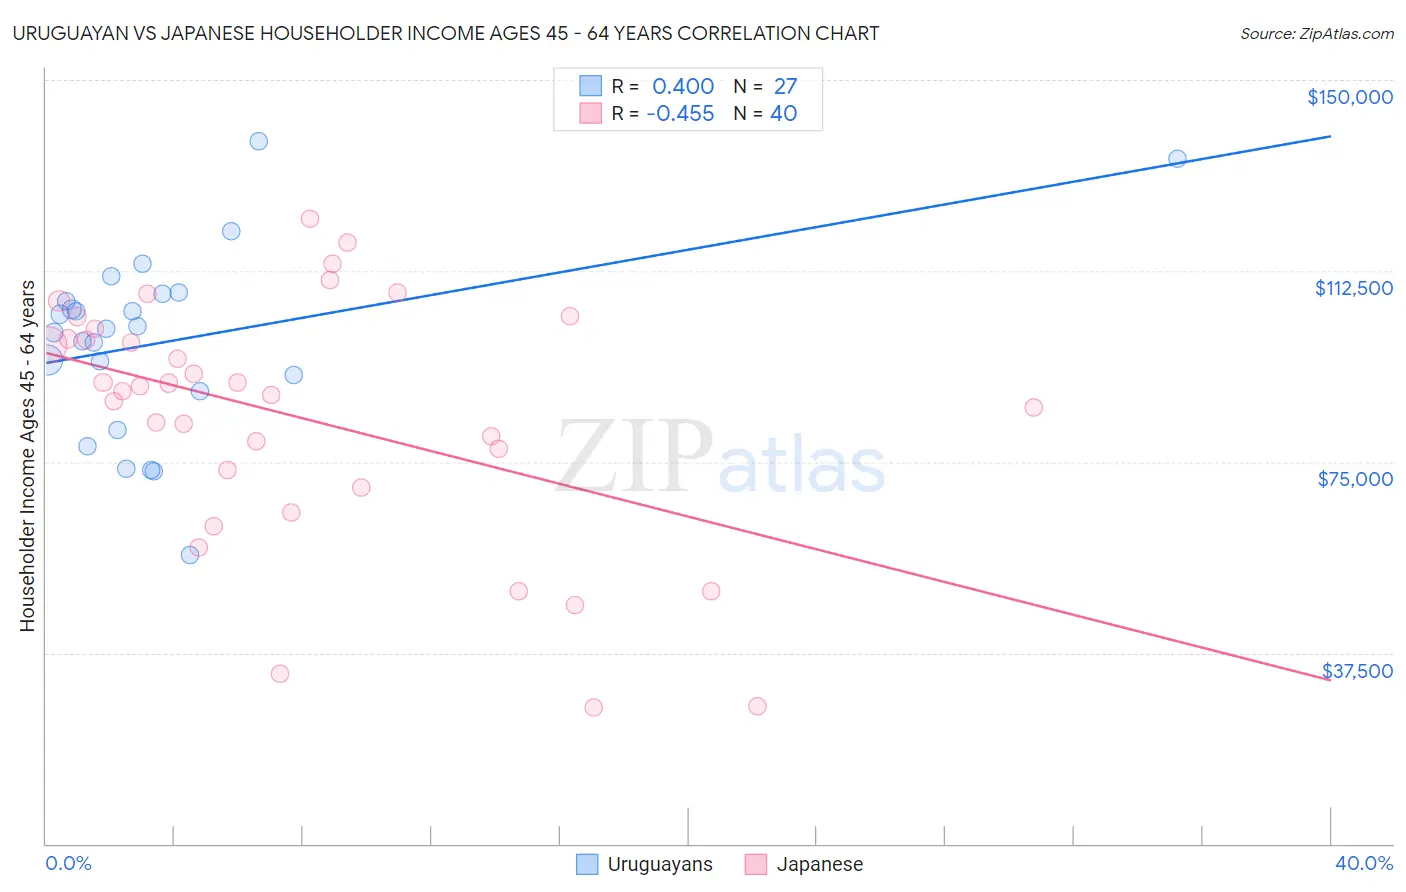 Uruguayan vs Japanese Householder Income Ages 45 - 64 years